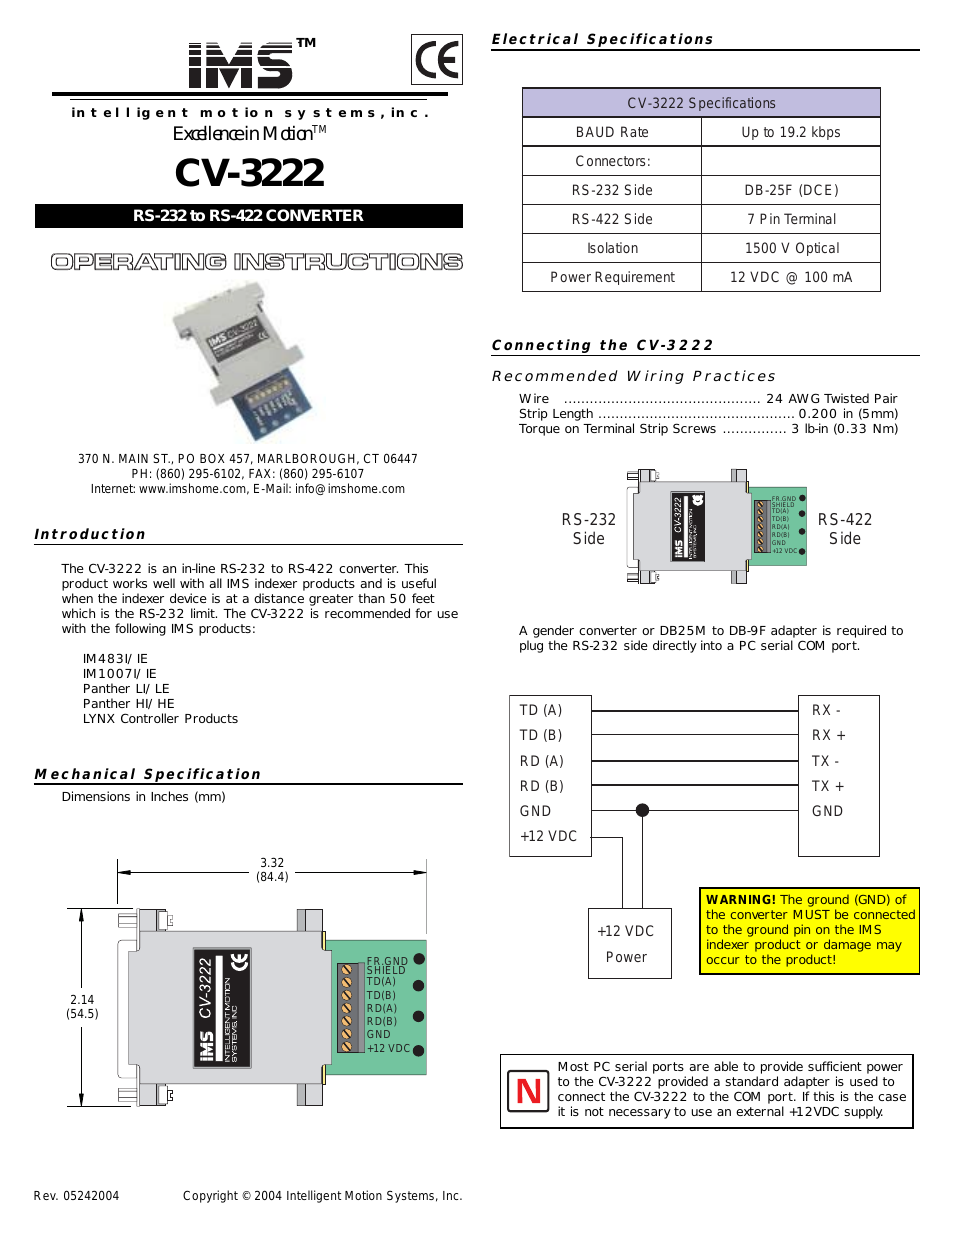 RS-232 to RS-422 Converter CV-3222